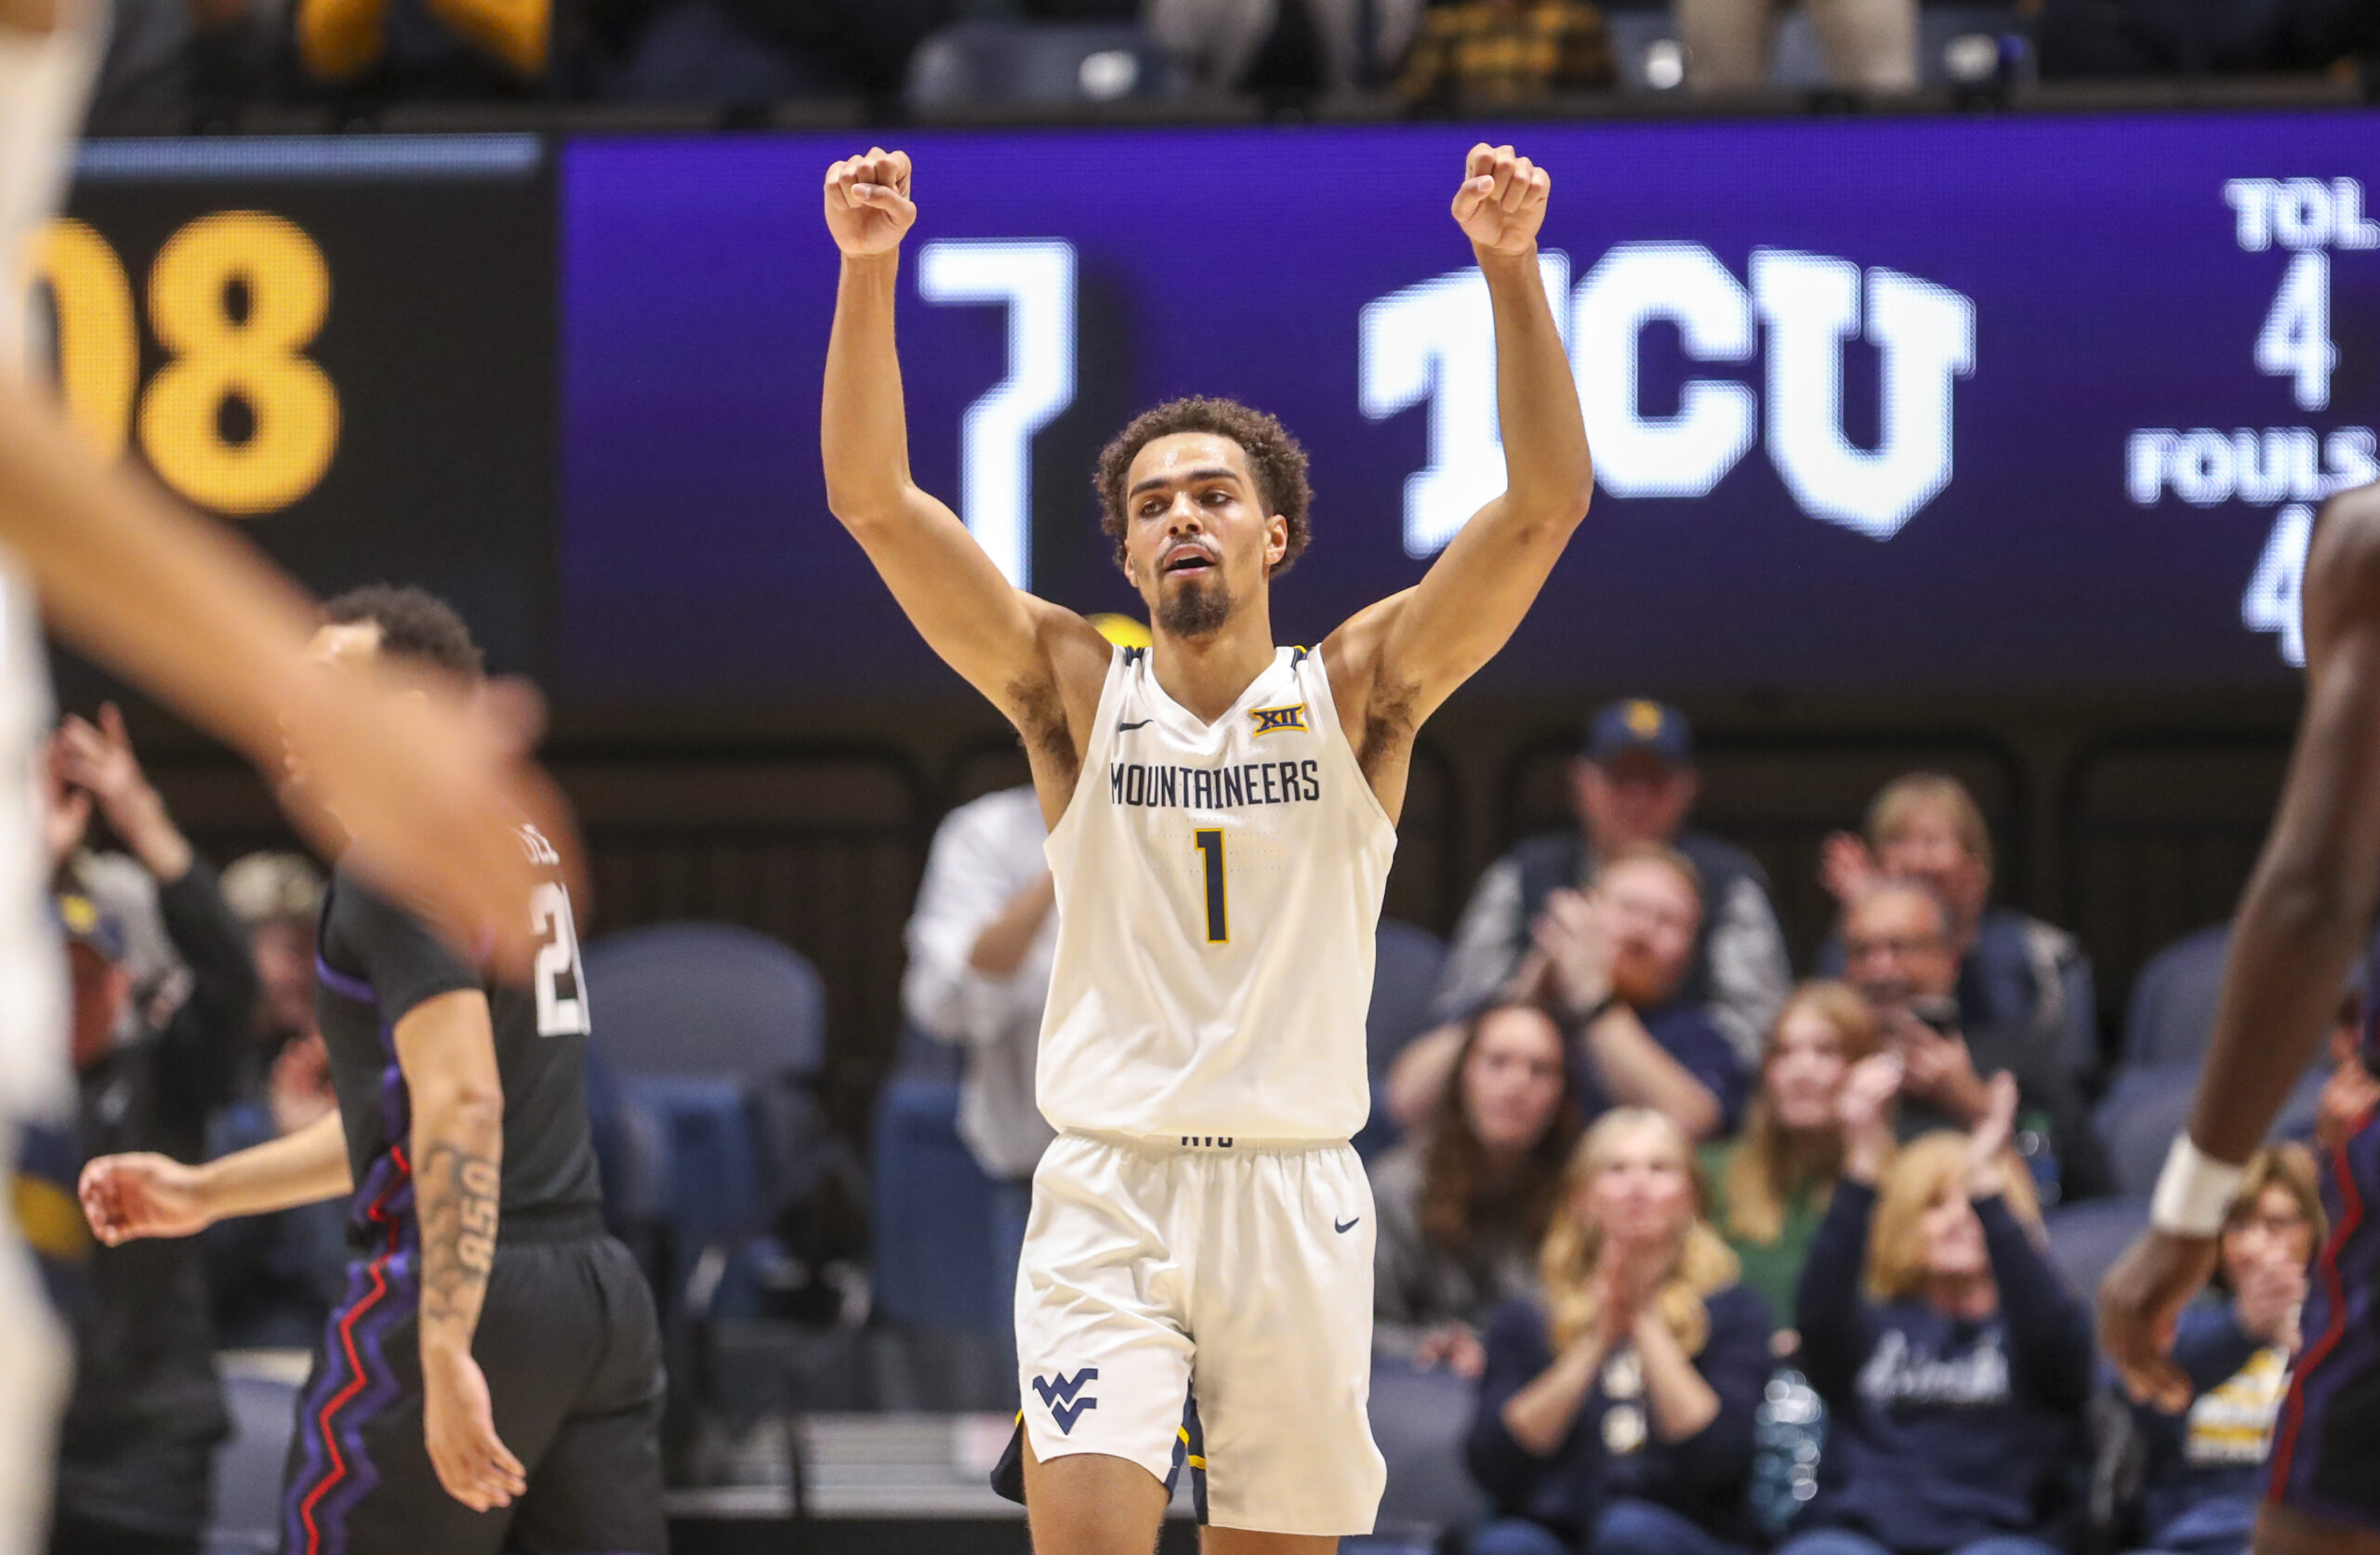 West Virginia gets it done down the stretch, tops No. 14 TCU 74-65 for first win in Big 12 play - WV MetroNews